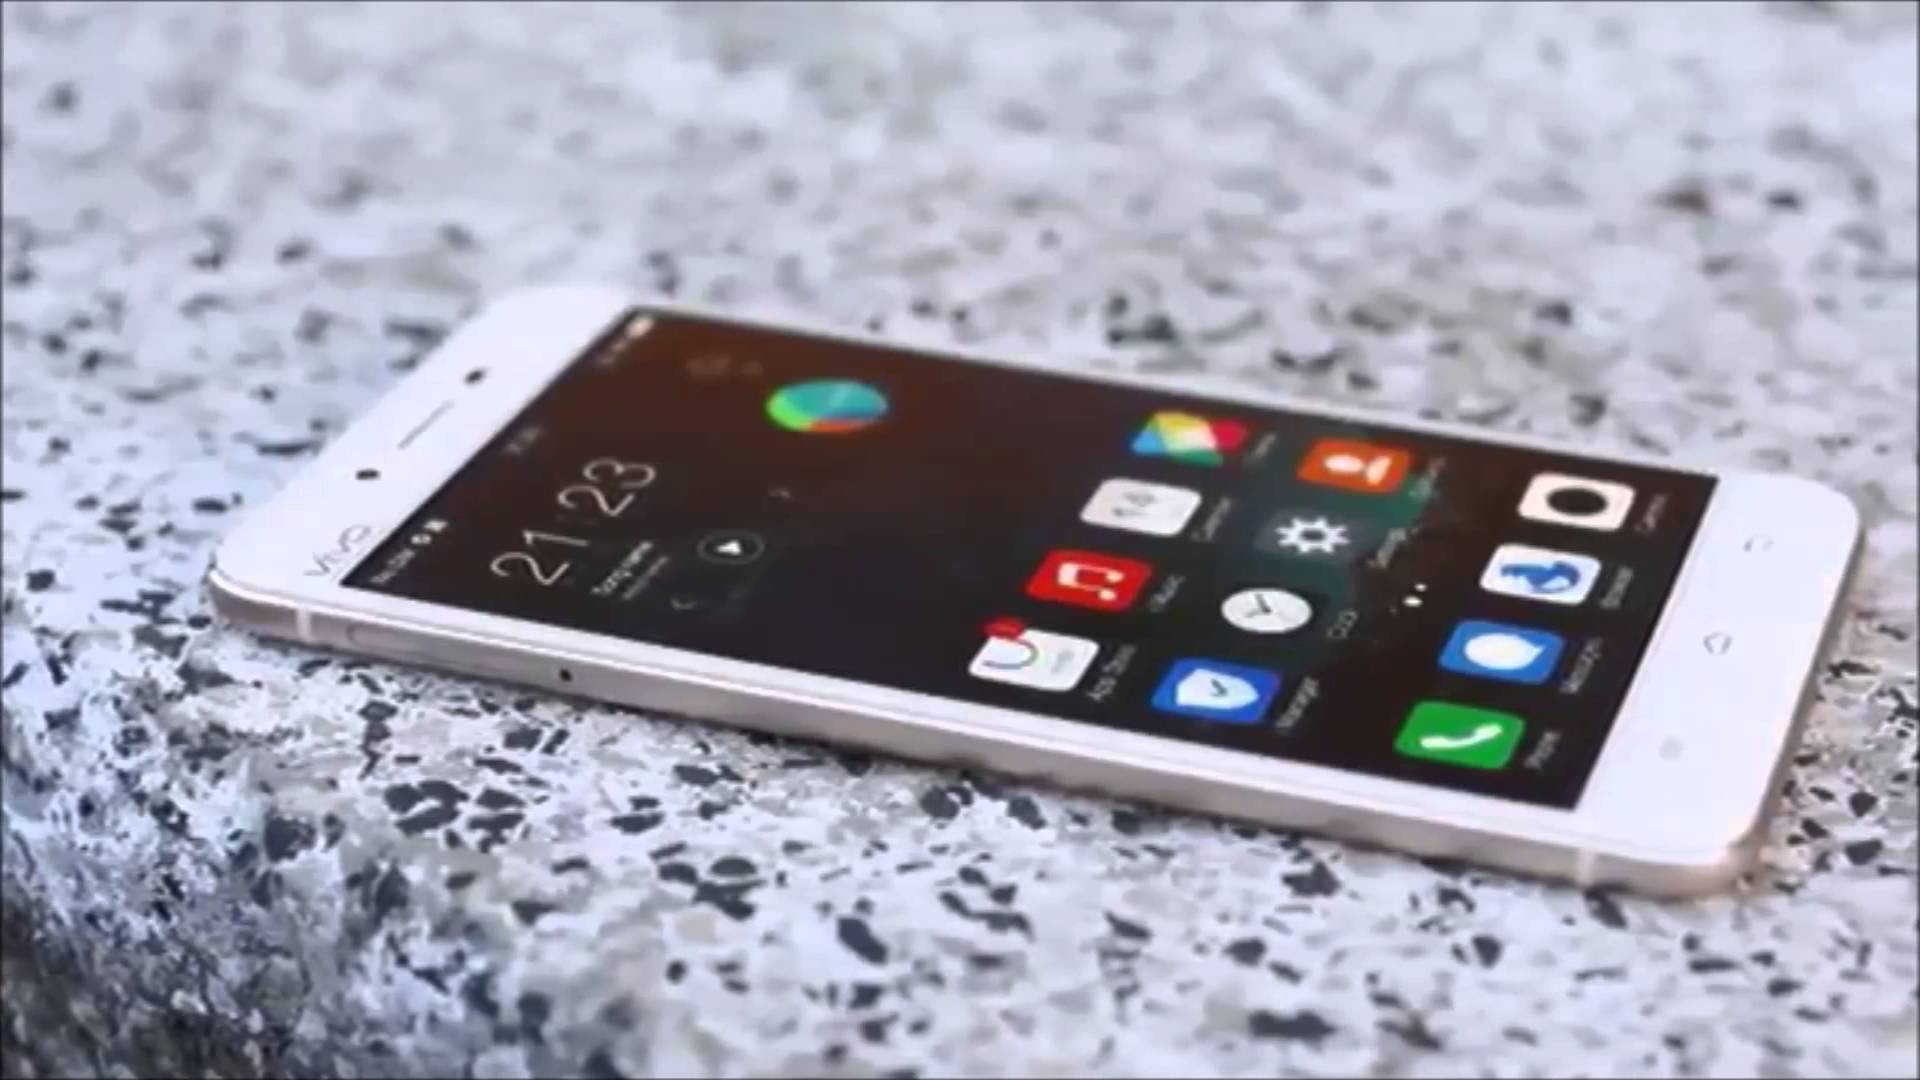 Vivo X6S with a 5.2-inch display 